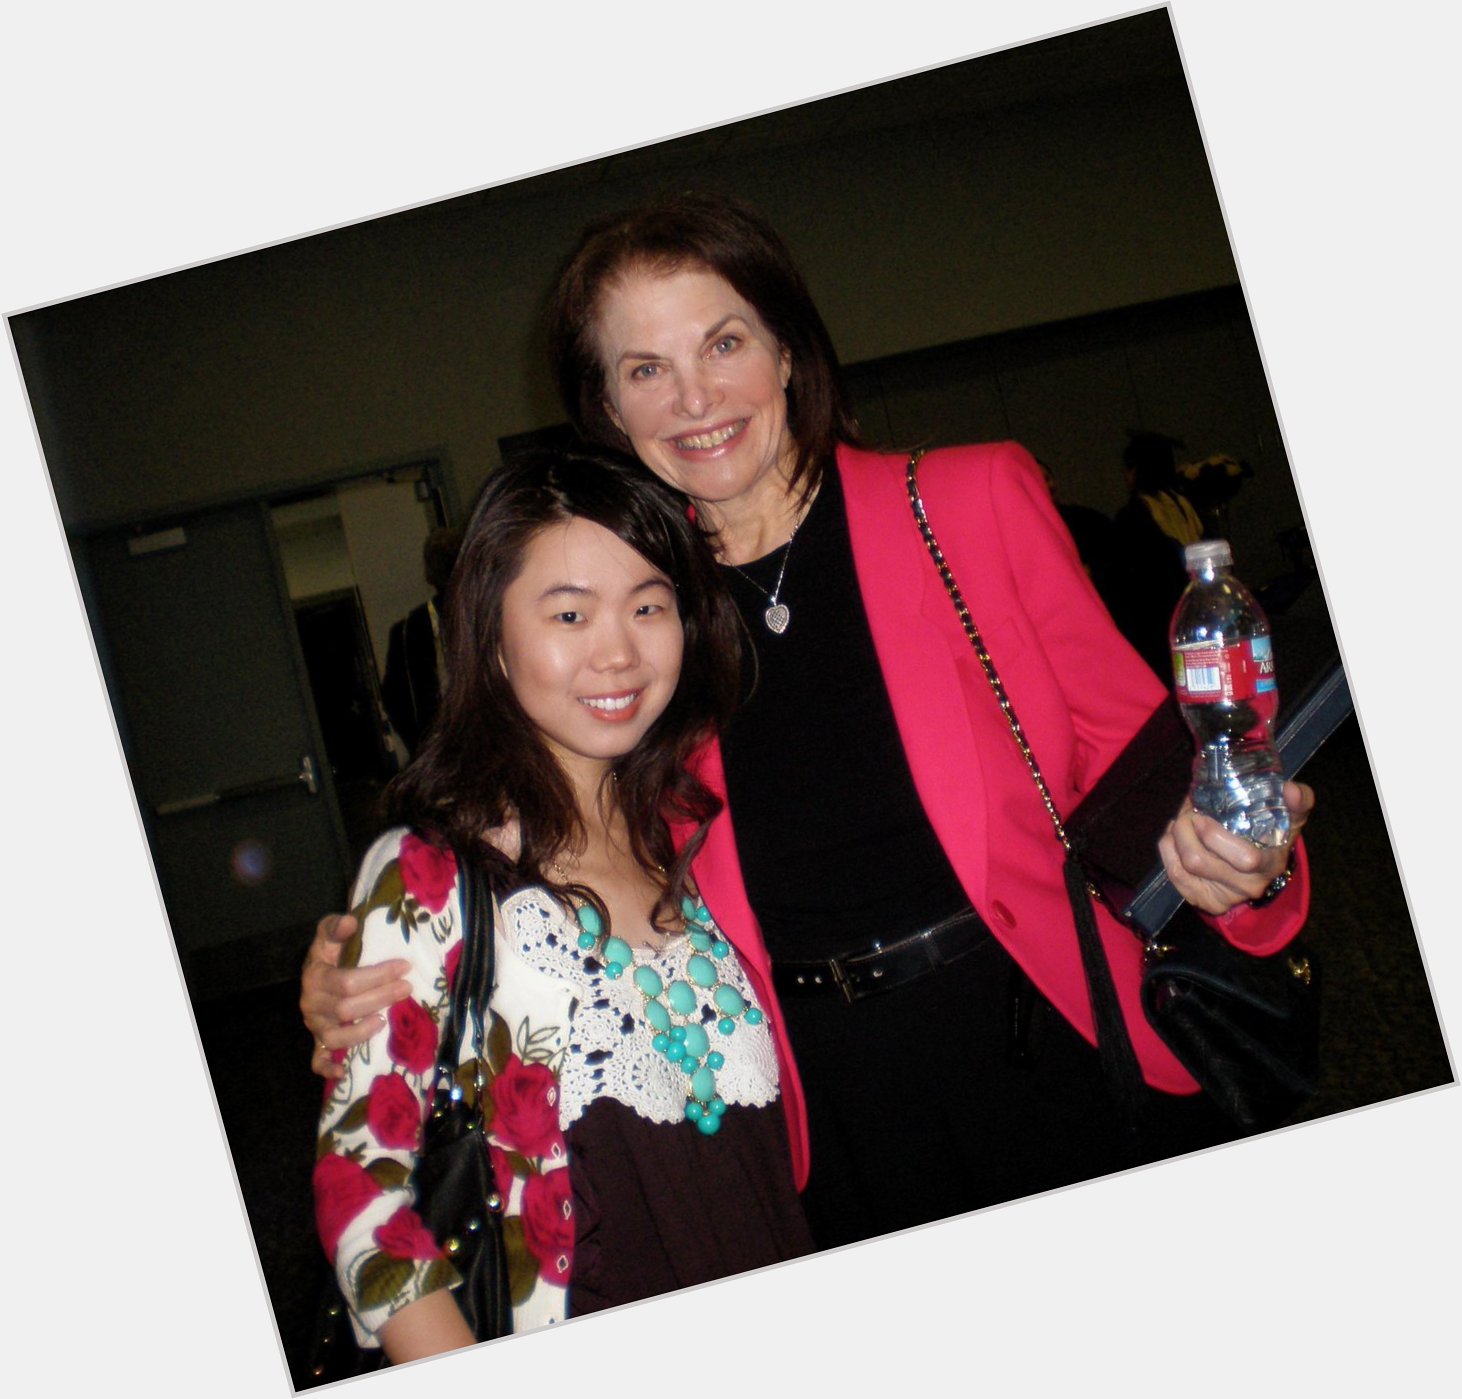 Happy belated birthday, Sherry Lansing! You are and always will be an inspiration to me. 